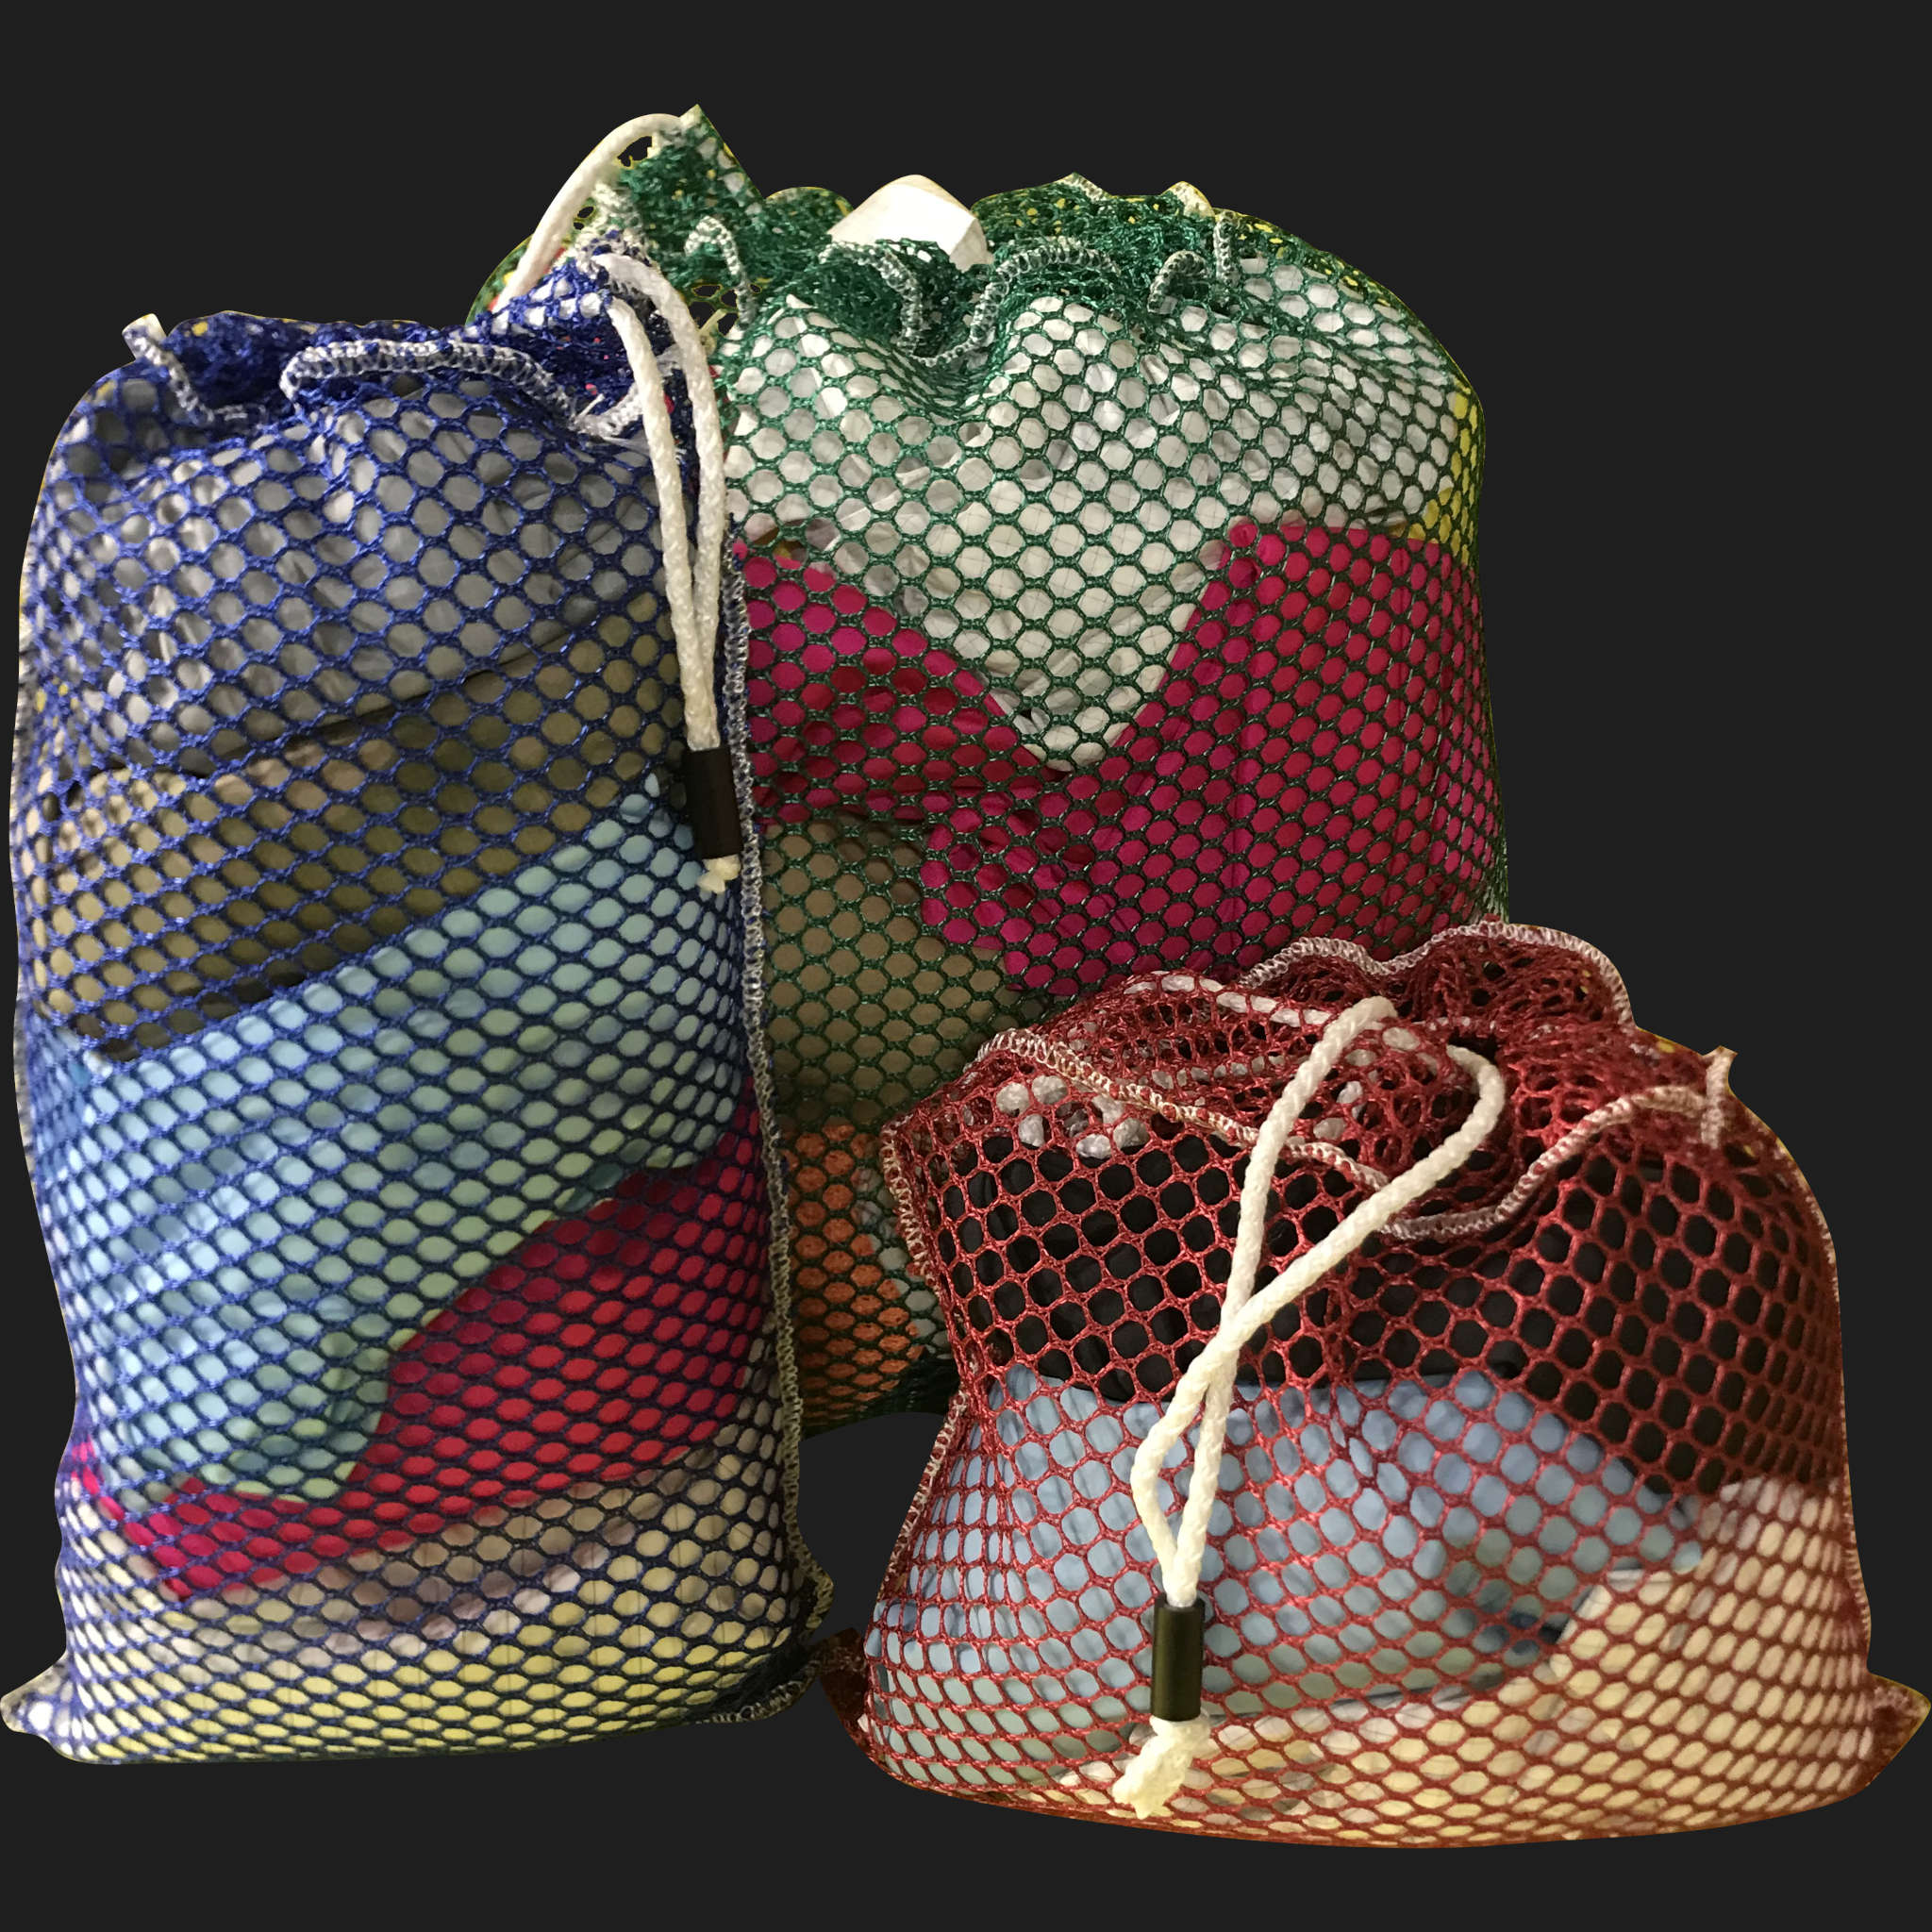 34" x 40" Customized Mesh-Net-Laundry Bags Heavy Duty with Cord and barrellock closure